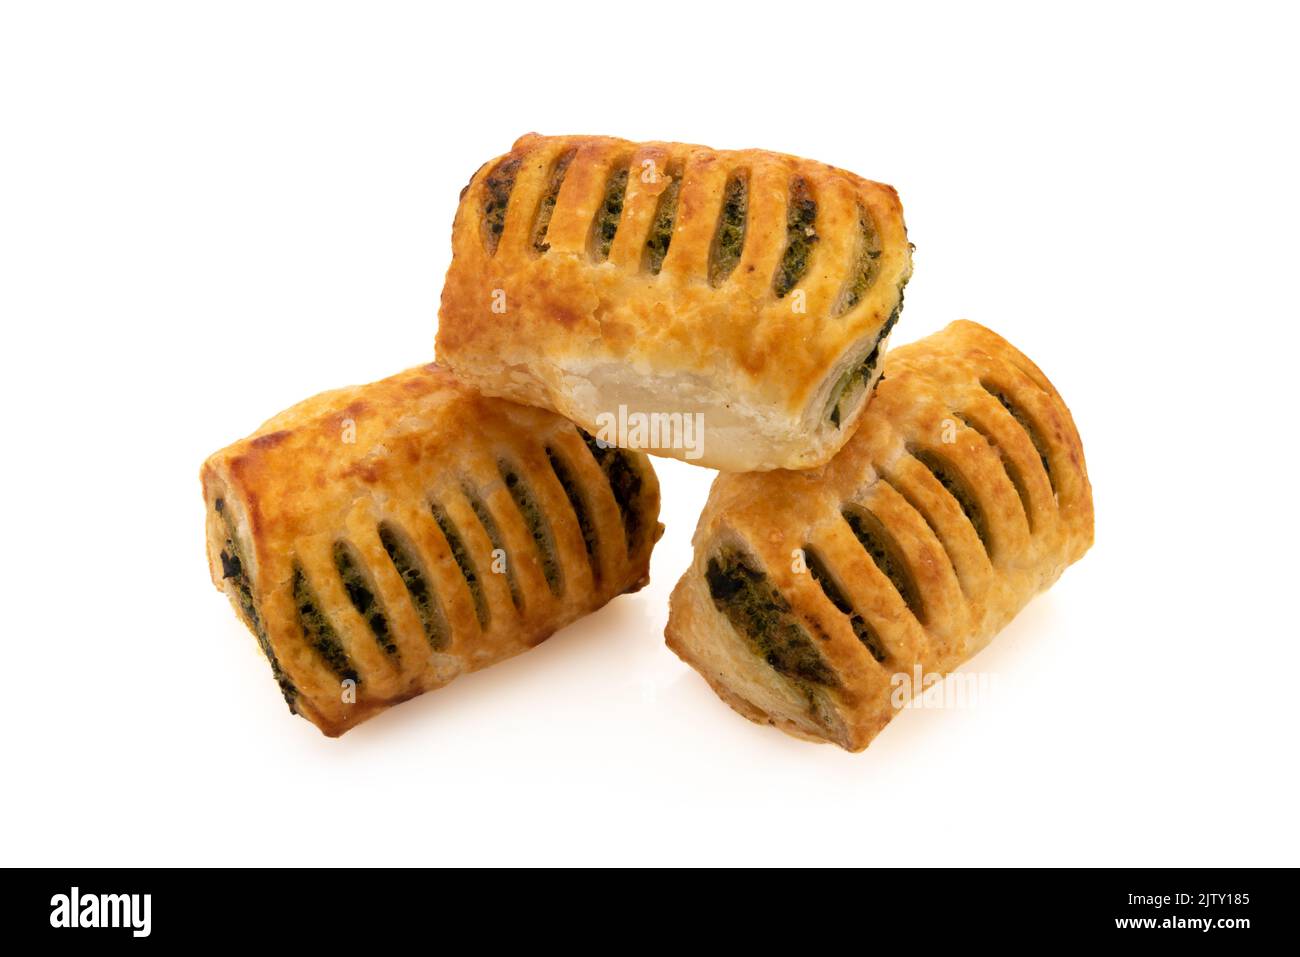 Baked puff pastry stuffed with spinach and cheese isolated on white Stock Photo